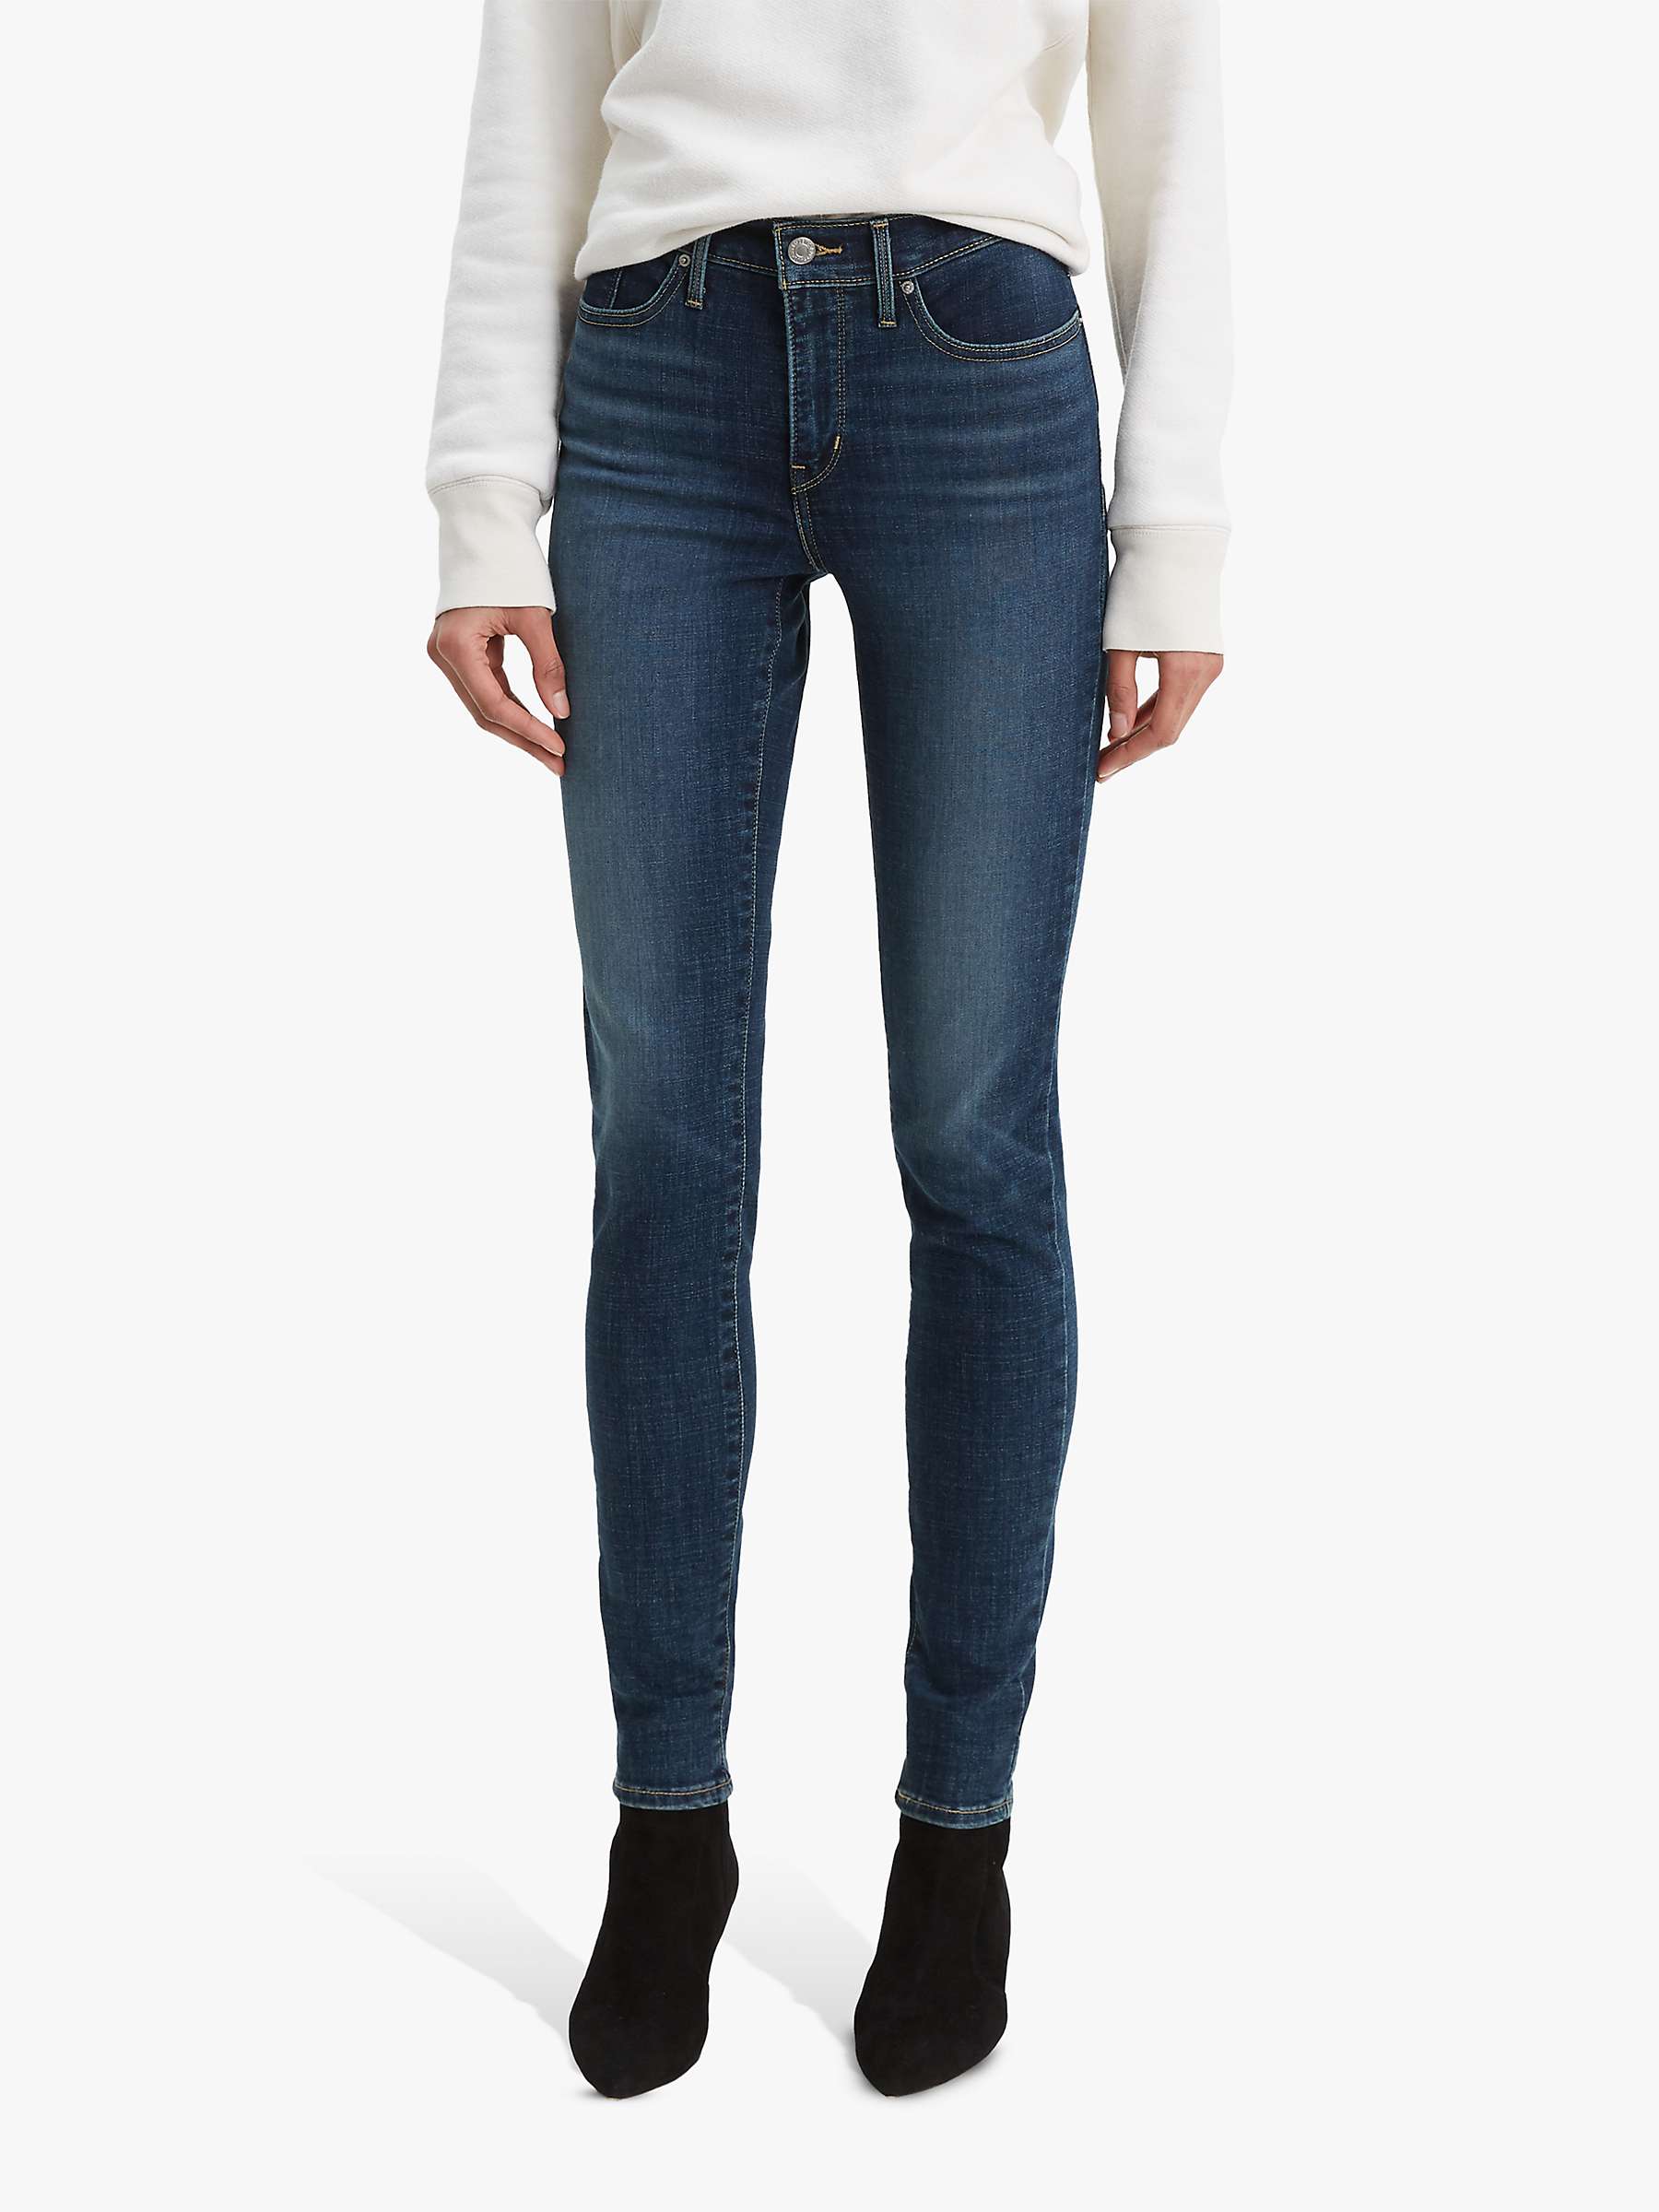 Buy Levi's 311 Shaping Skinny Jeans, Lapis Maui Views Online at johnlewis.com